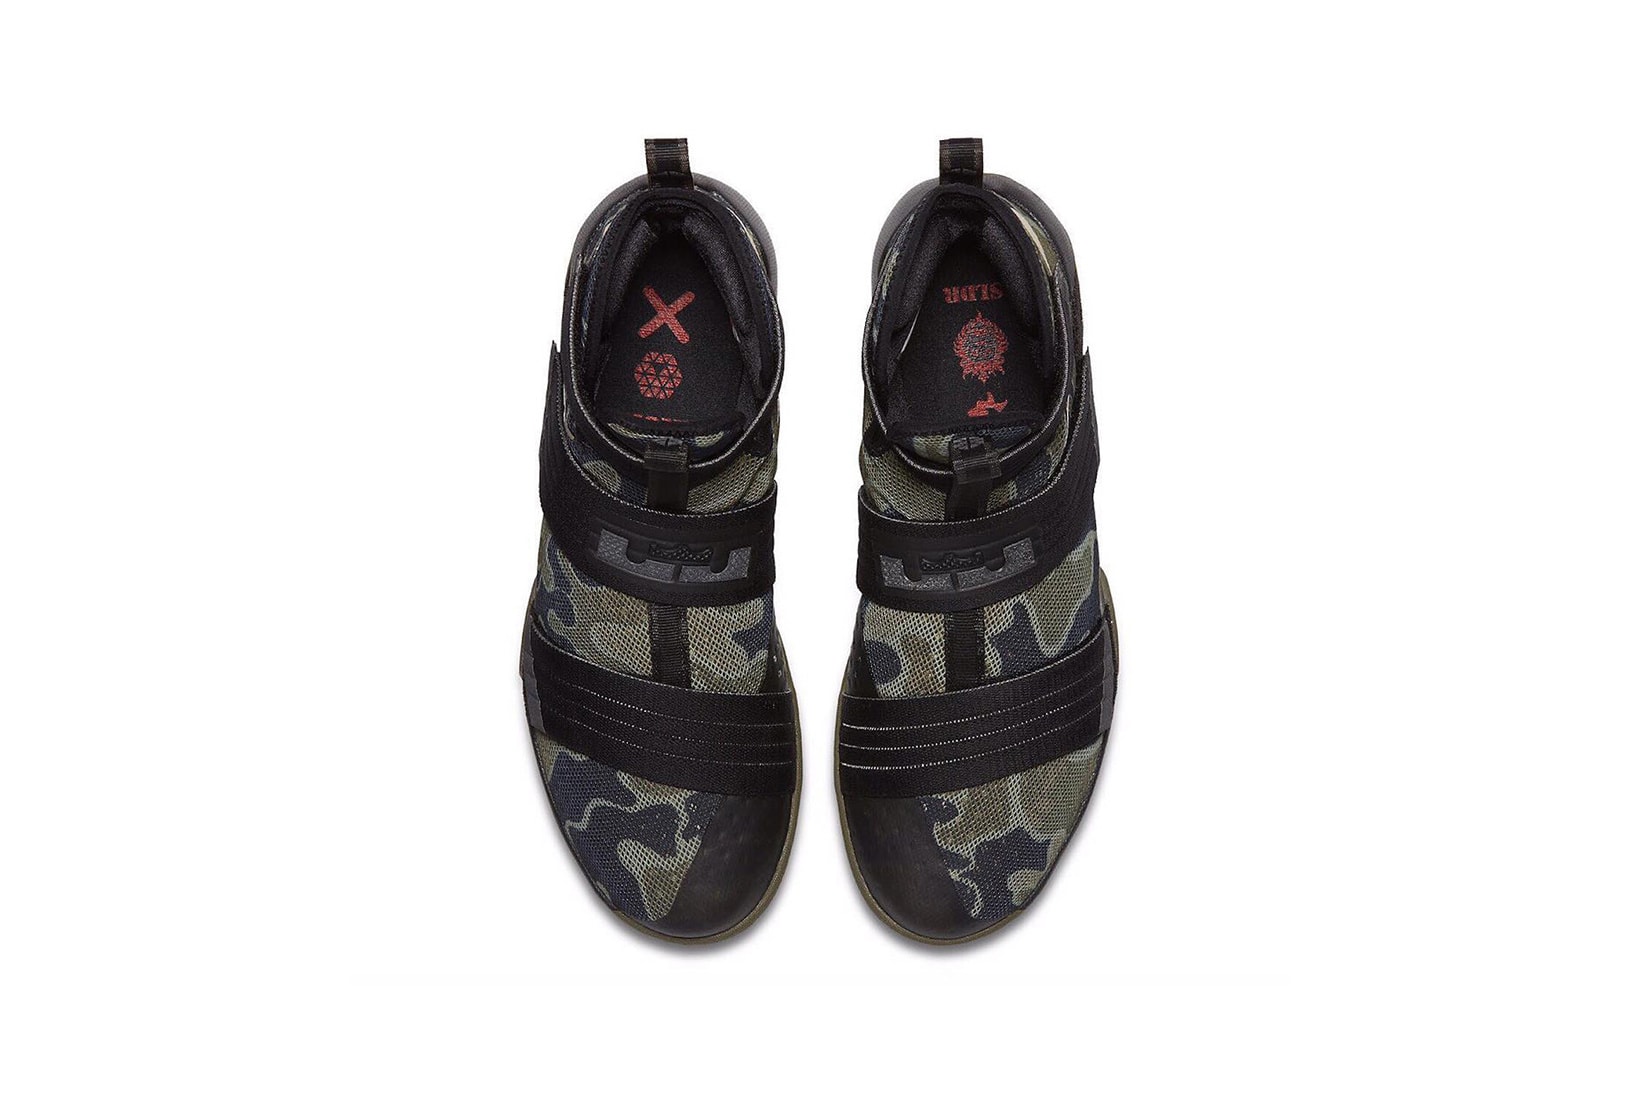 LeBron Soldier 10 Camouflage Colorway